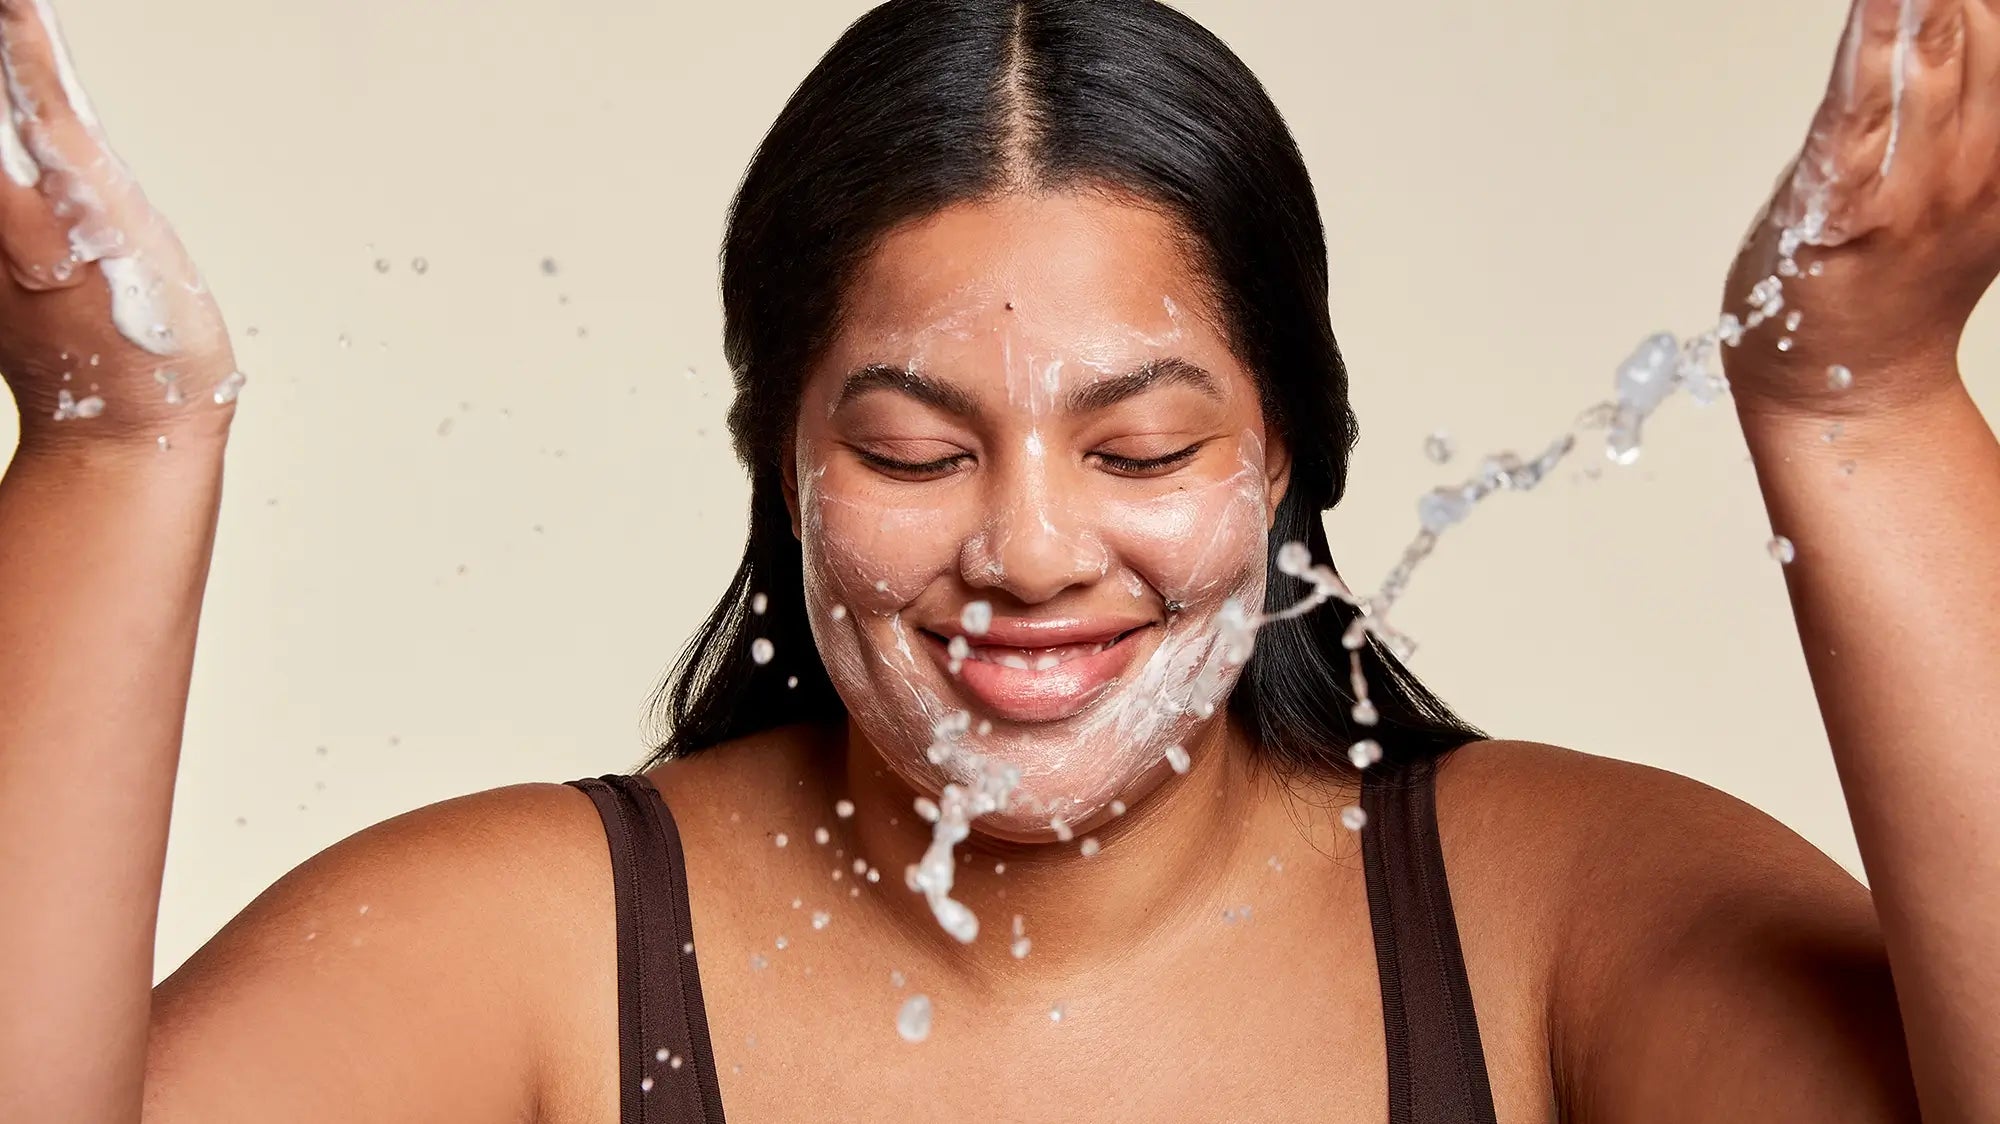 woman playfully washing her face